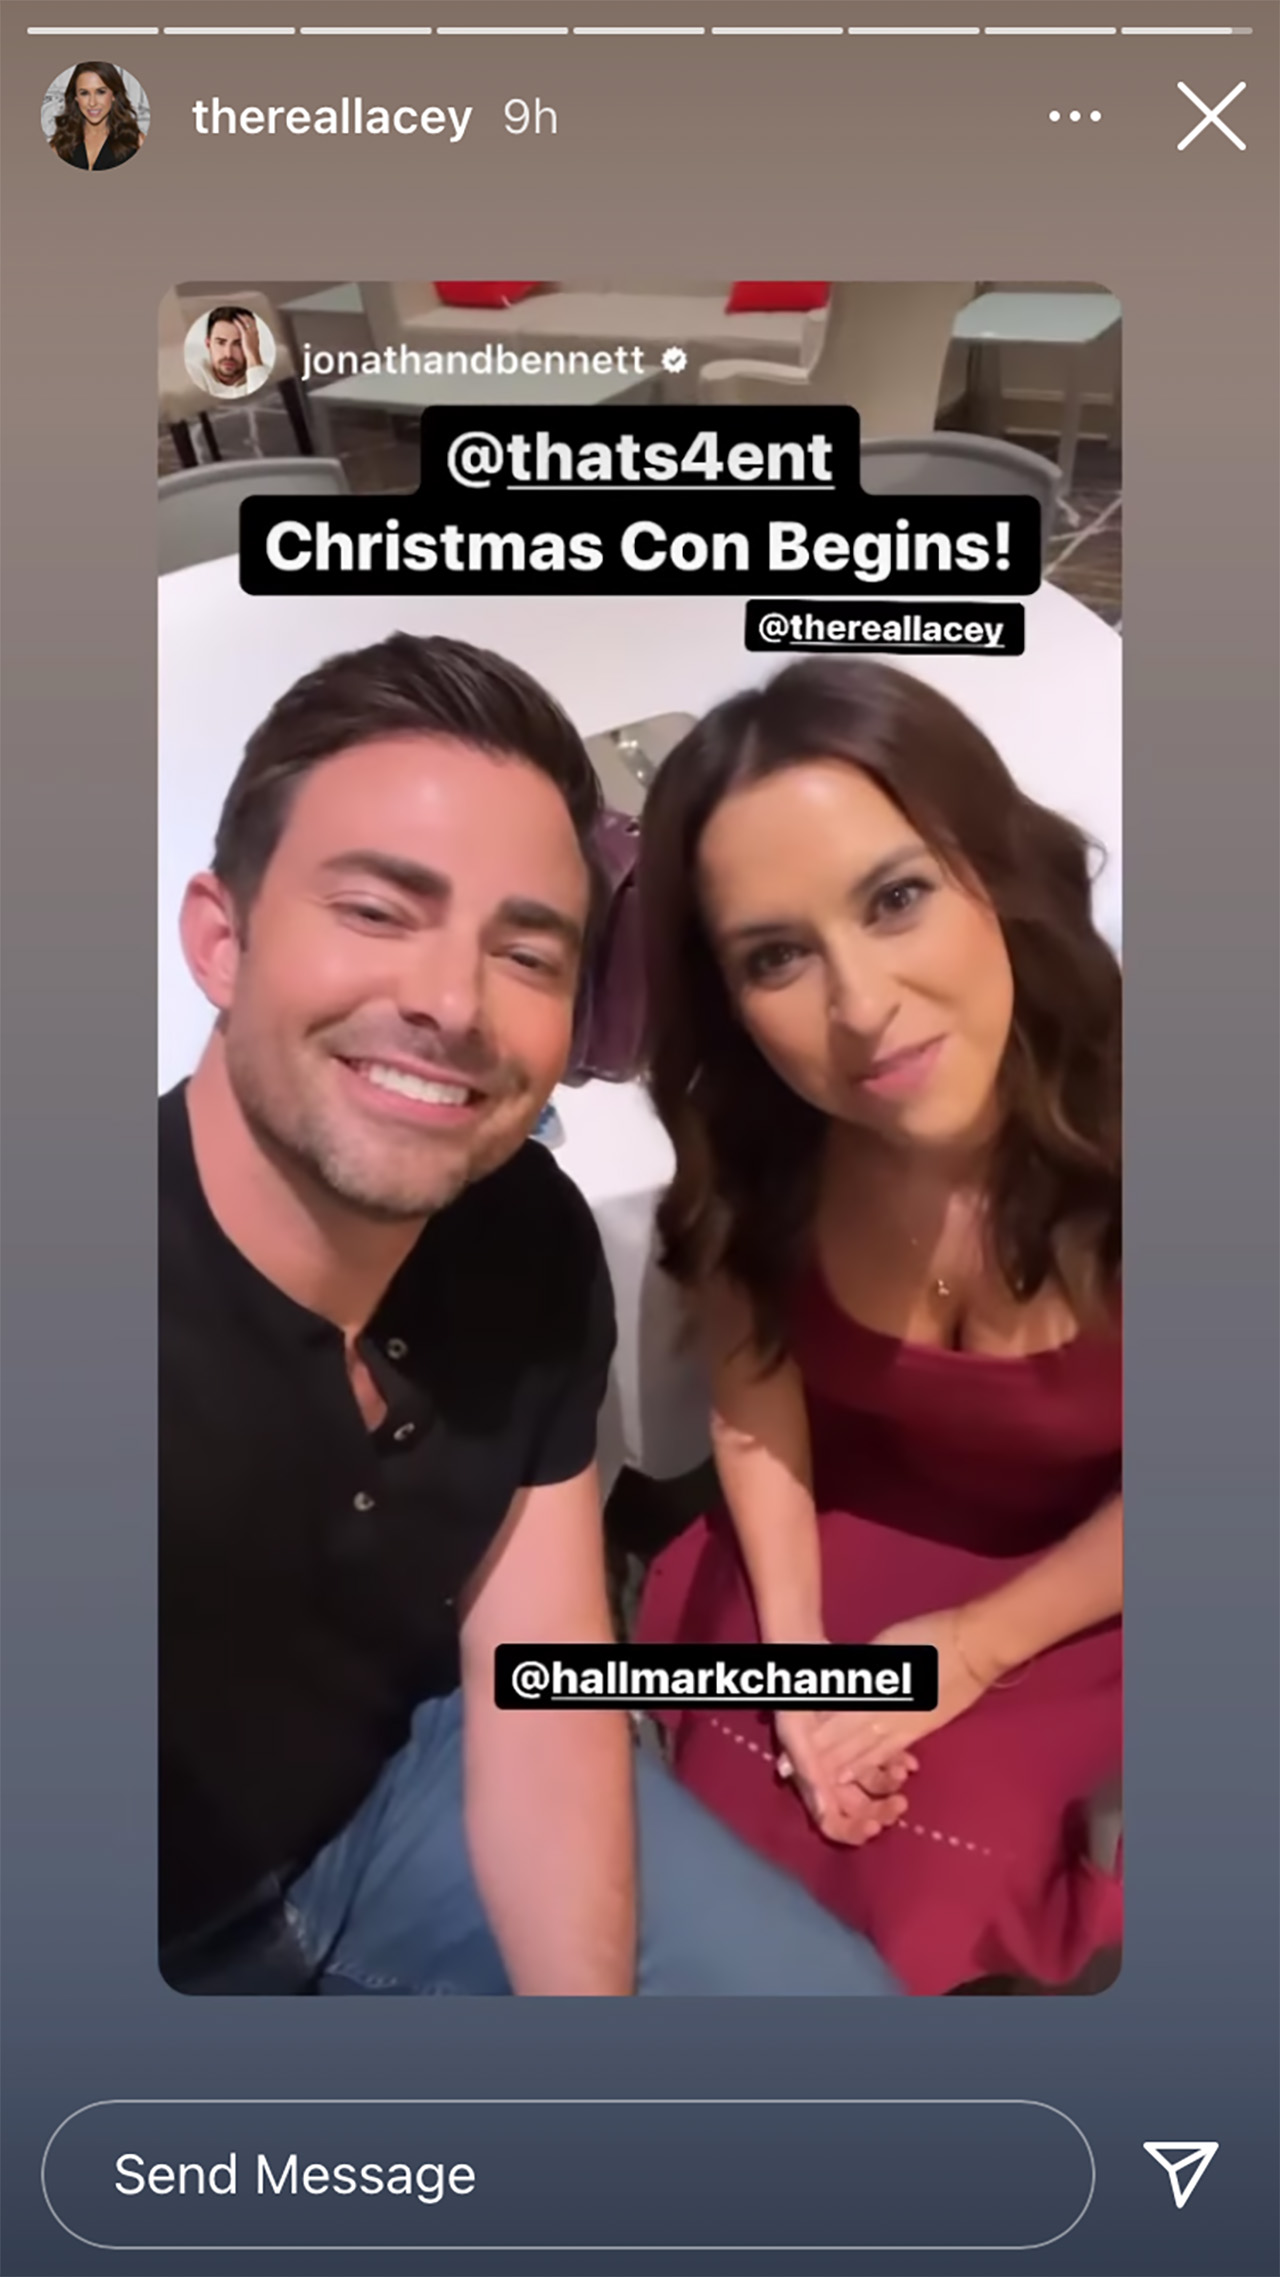 Lacey Chabert and Jonathan Bennett get together at Christmas Con